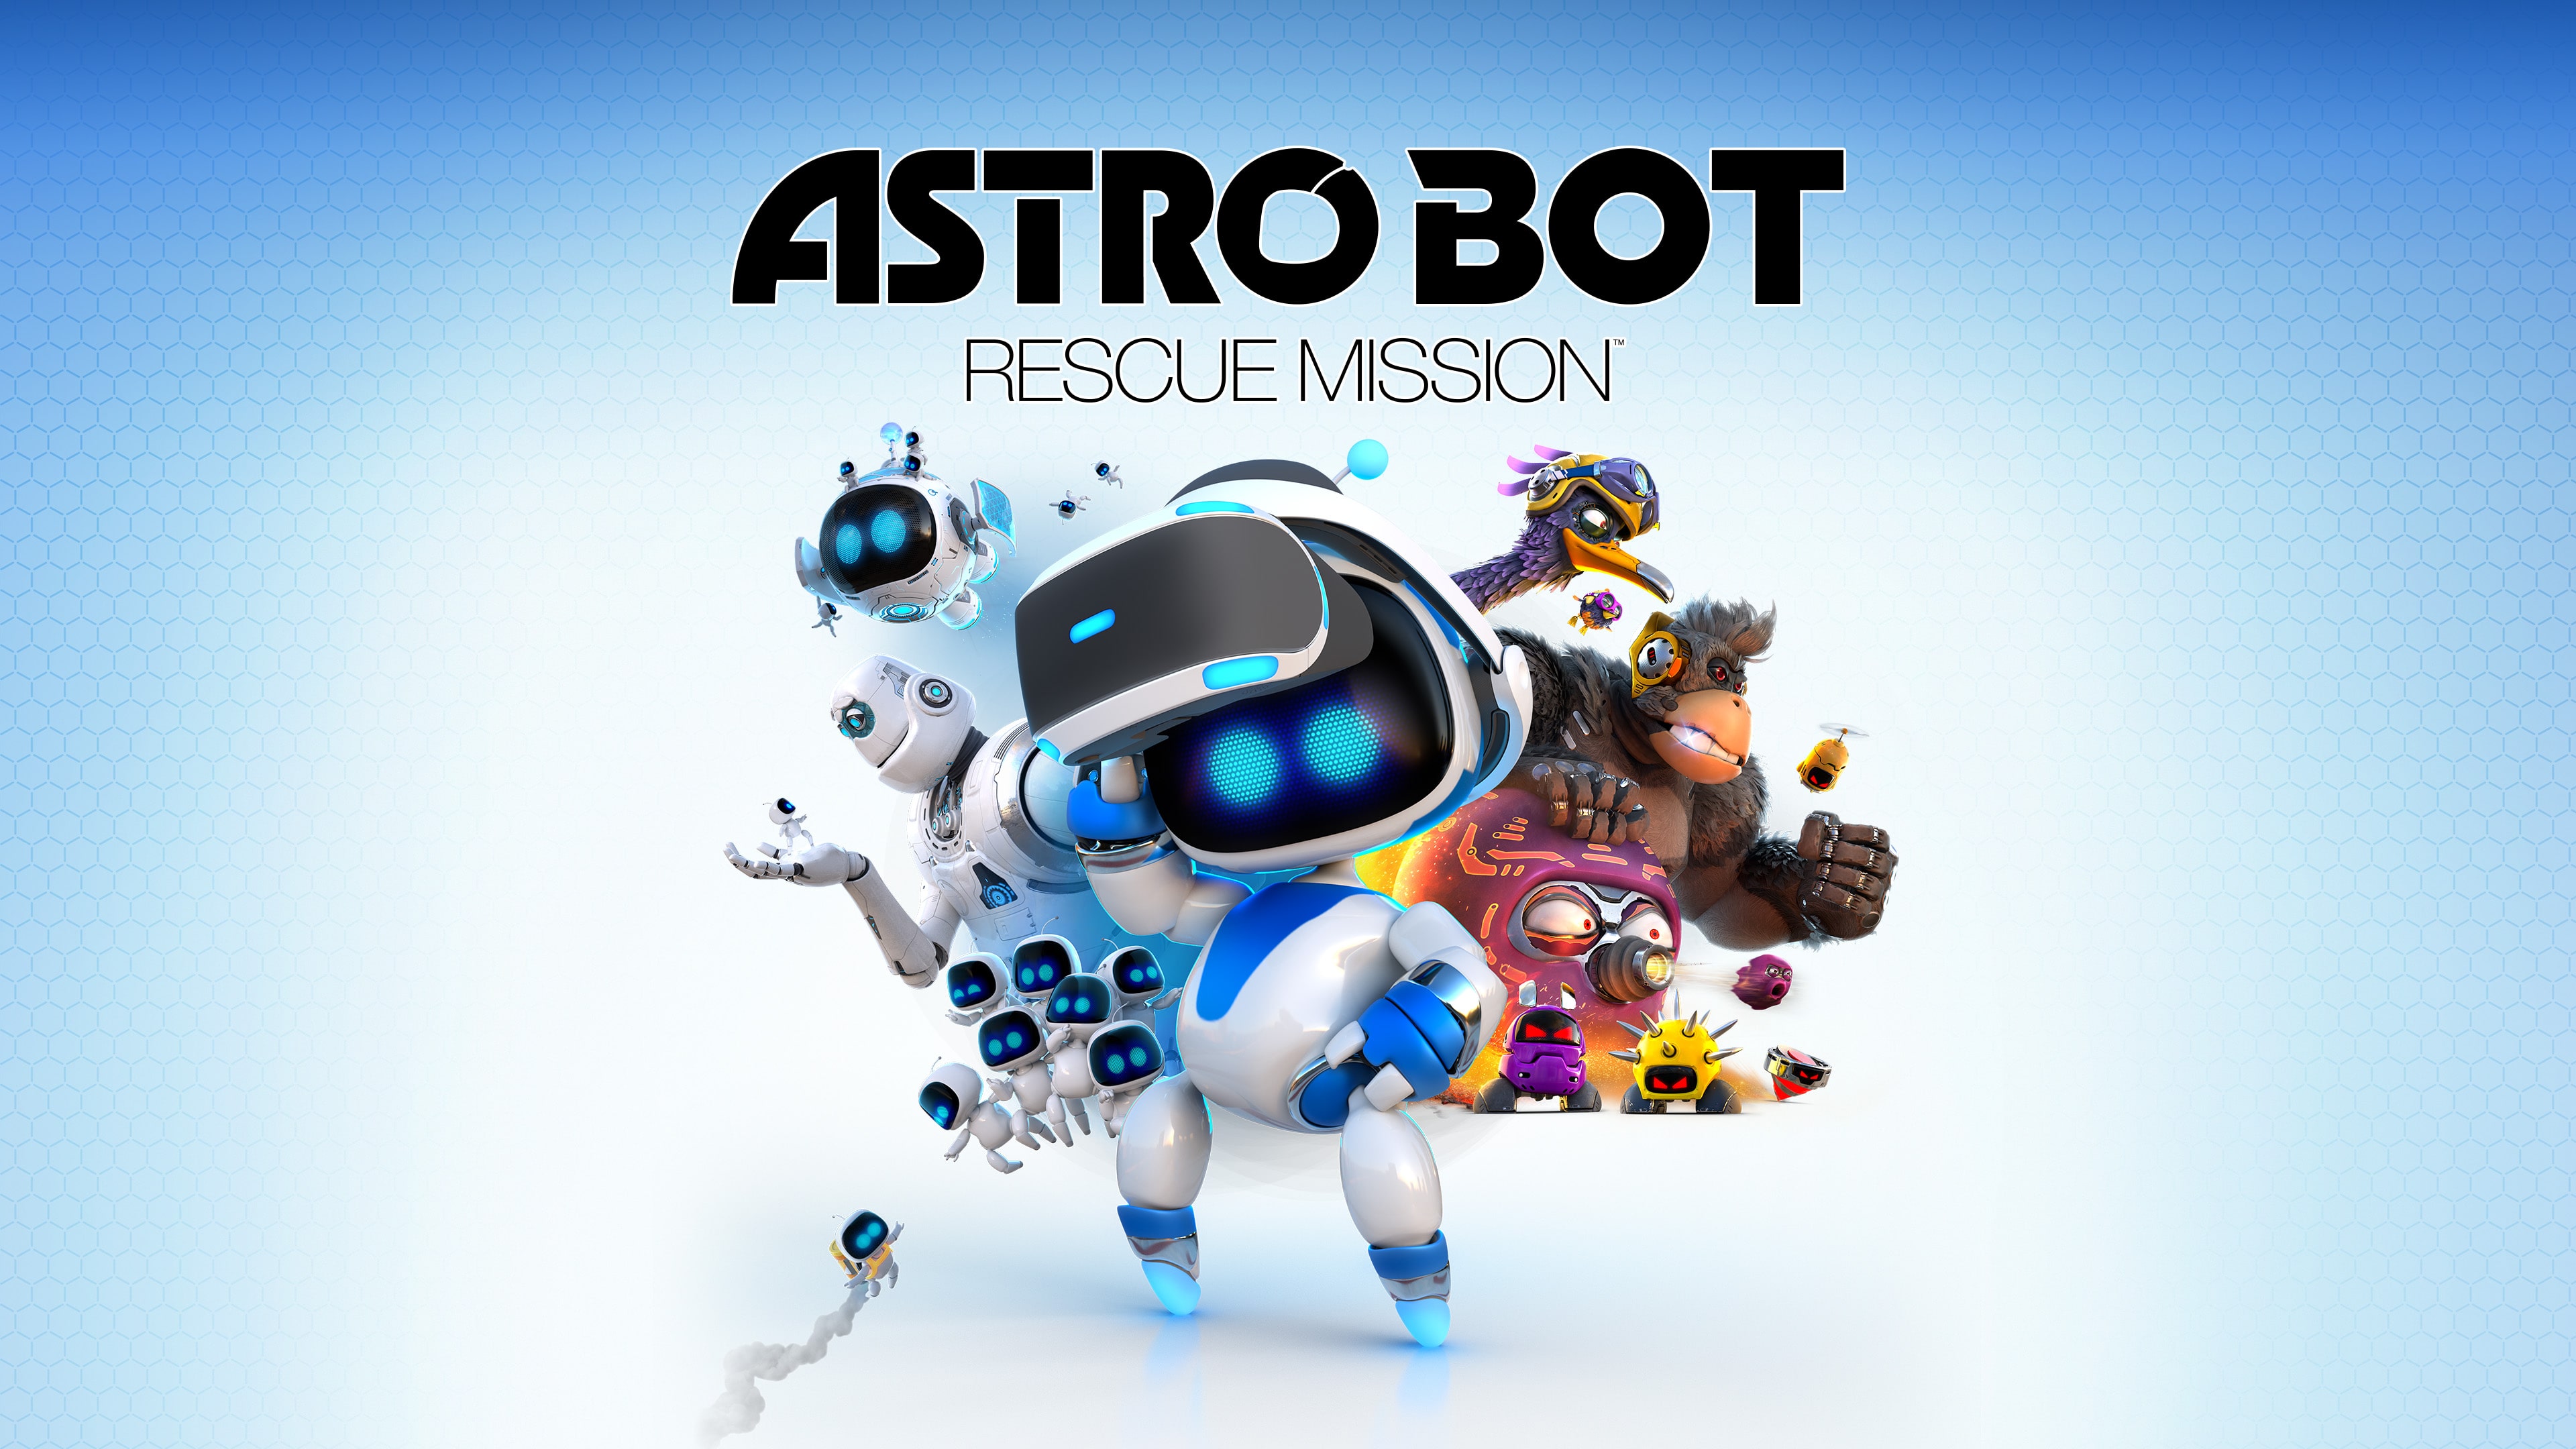 ASTROBOT: RESCUE MISSION (incl. Thai) (Simplified Chinese, English, Korean, Thai, Japanese, Traditional Chinese)